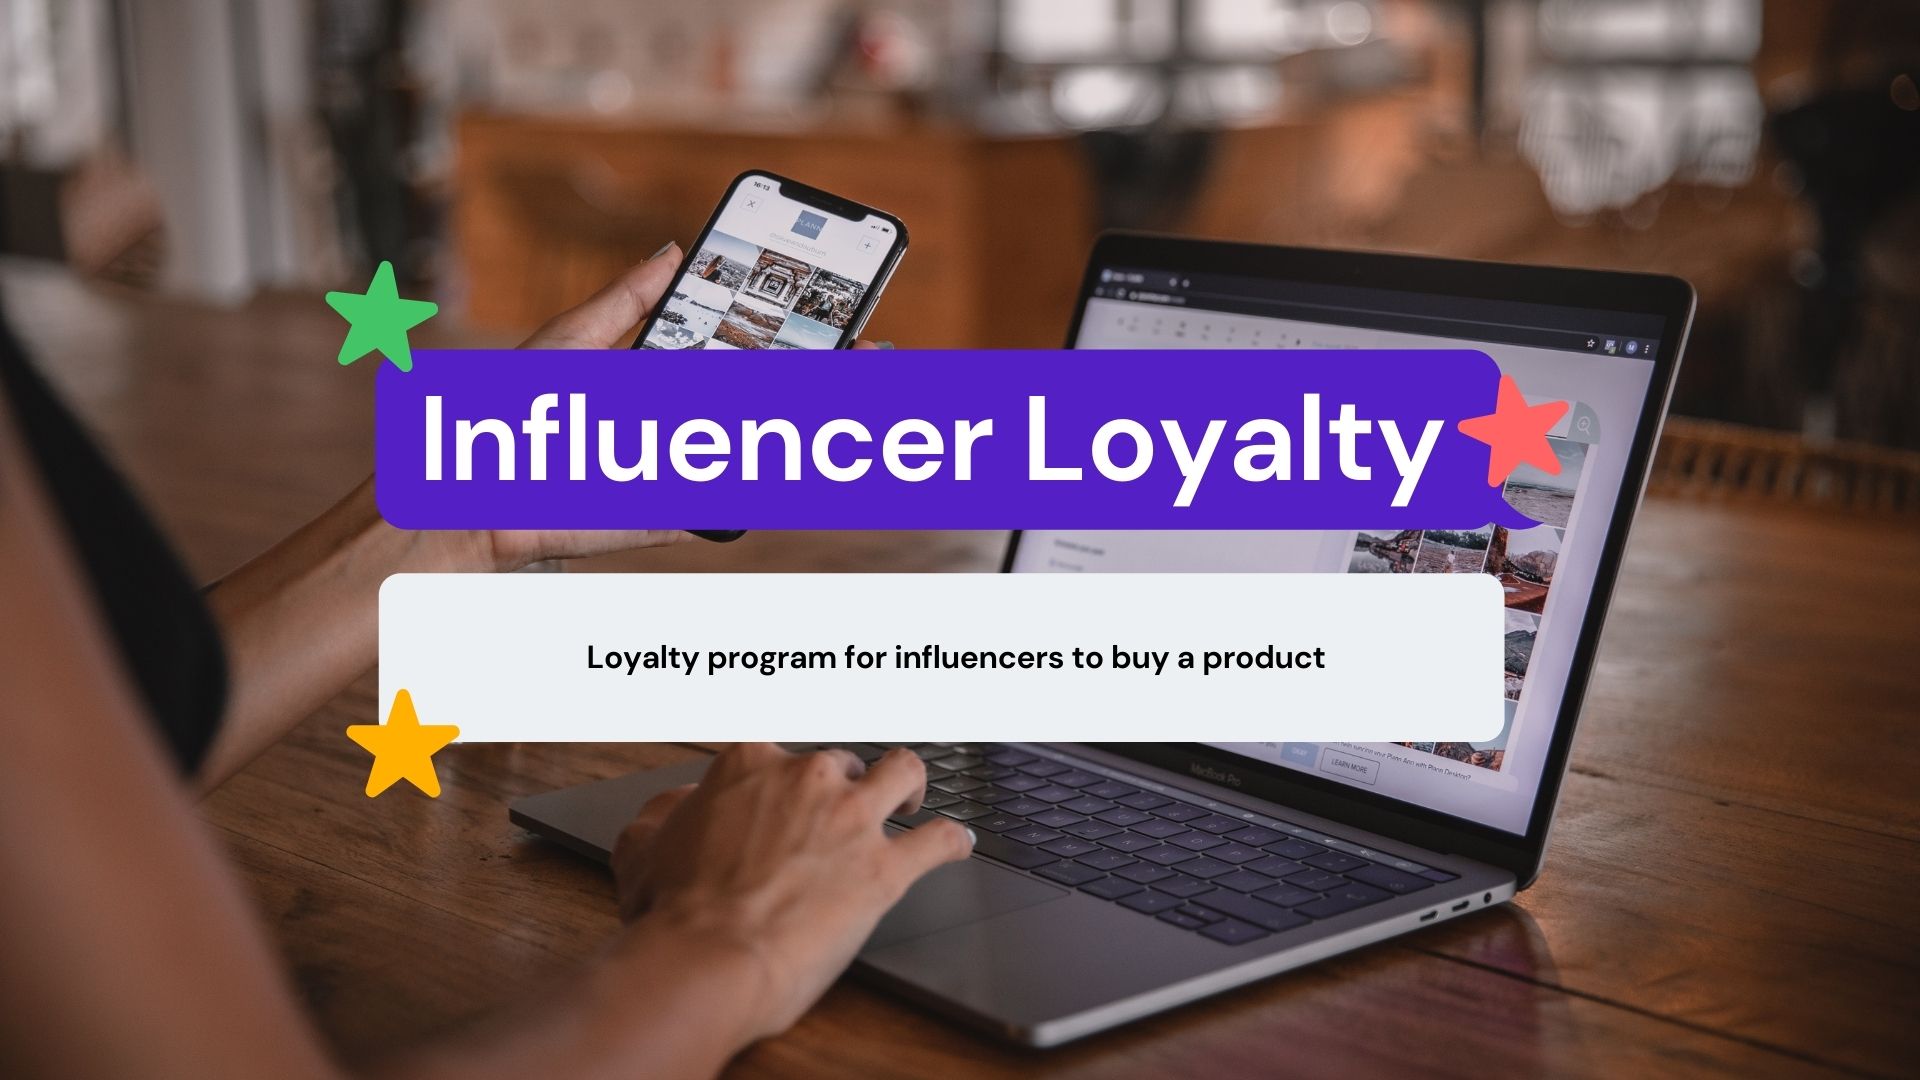 Influencer Loyalty Programs by CXBOX - Best Channel Loyalty Programs in India